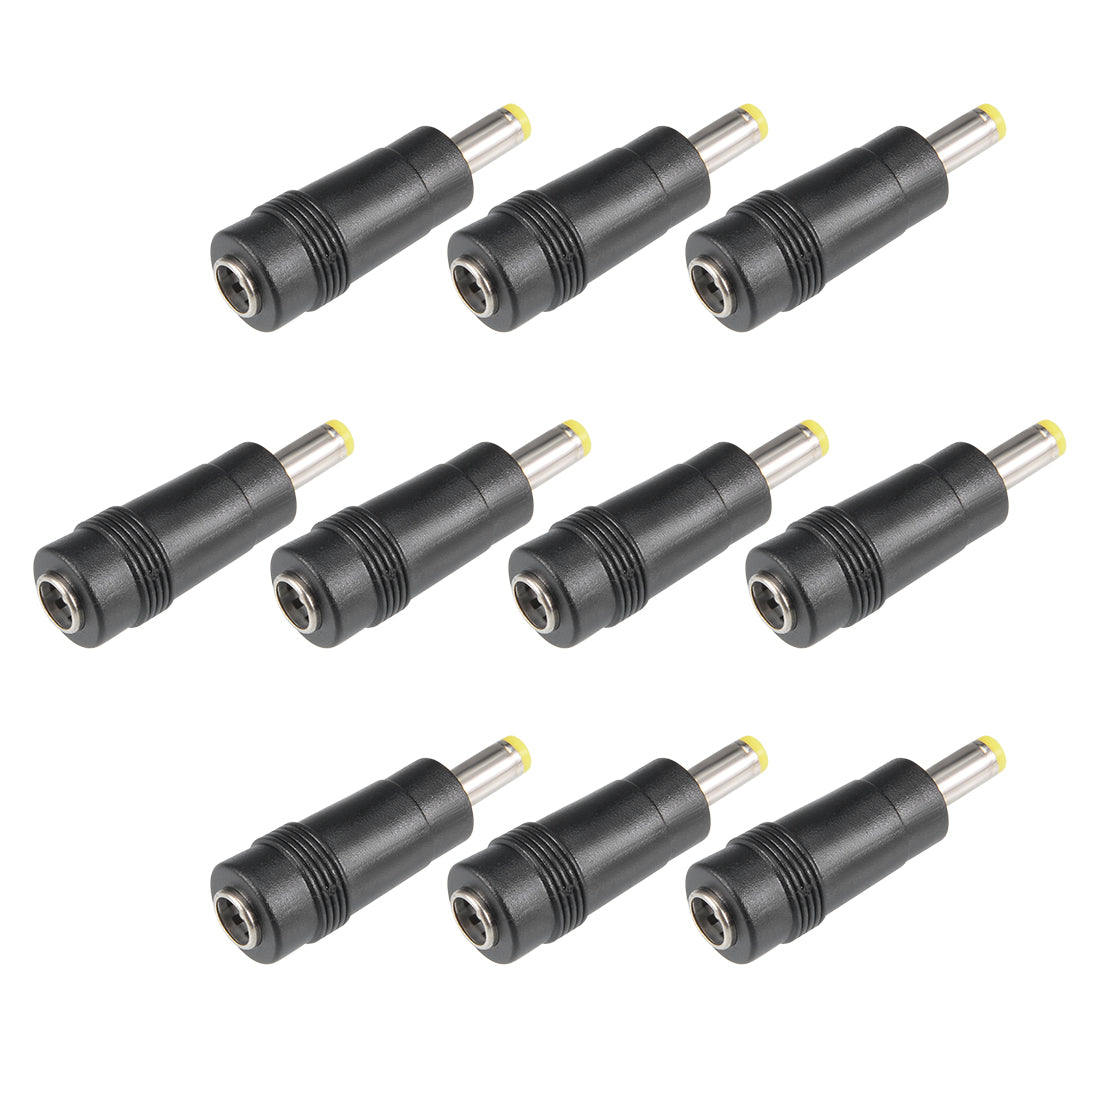 uxcell Uxcell 10 Pcs Copper DC Power Connector 5.5mmx2.1mm Female to 4.8mmx1.7mm Male Adapter